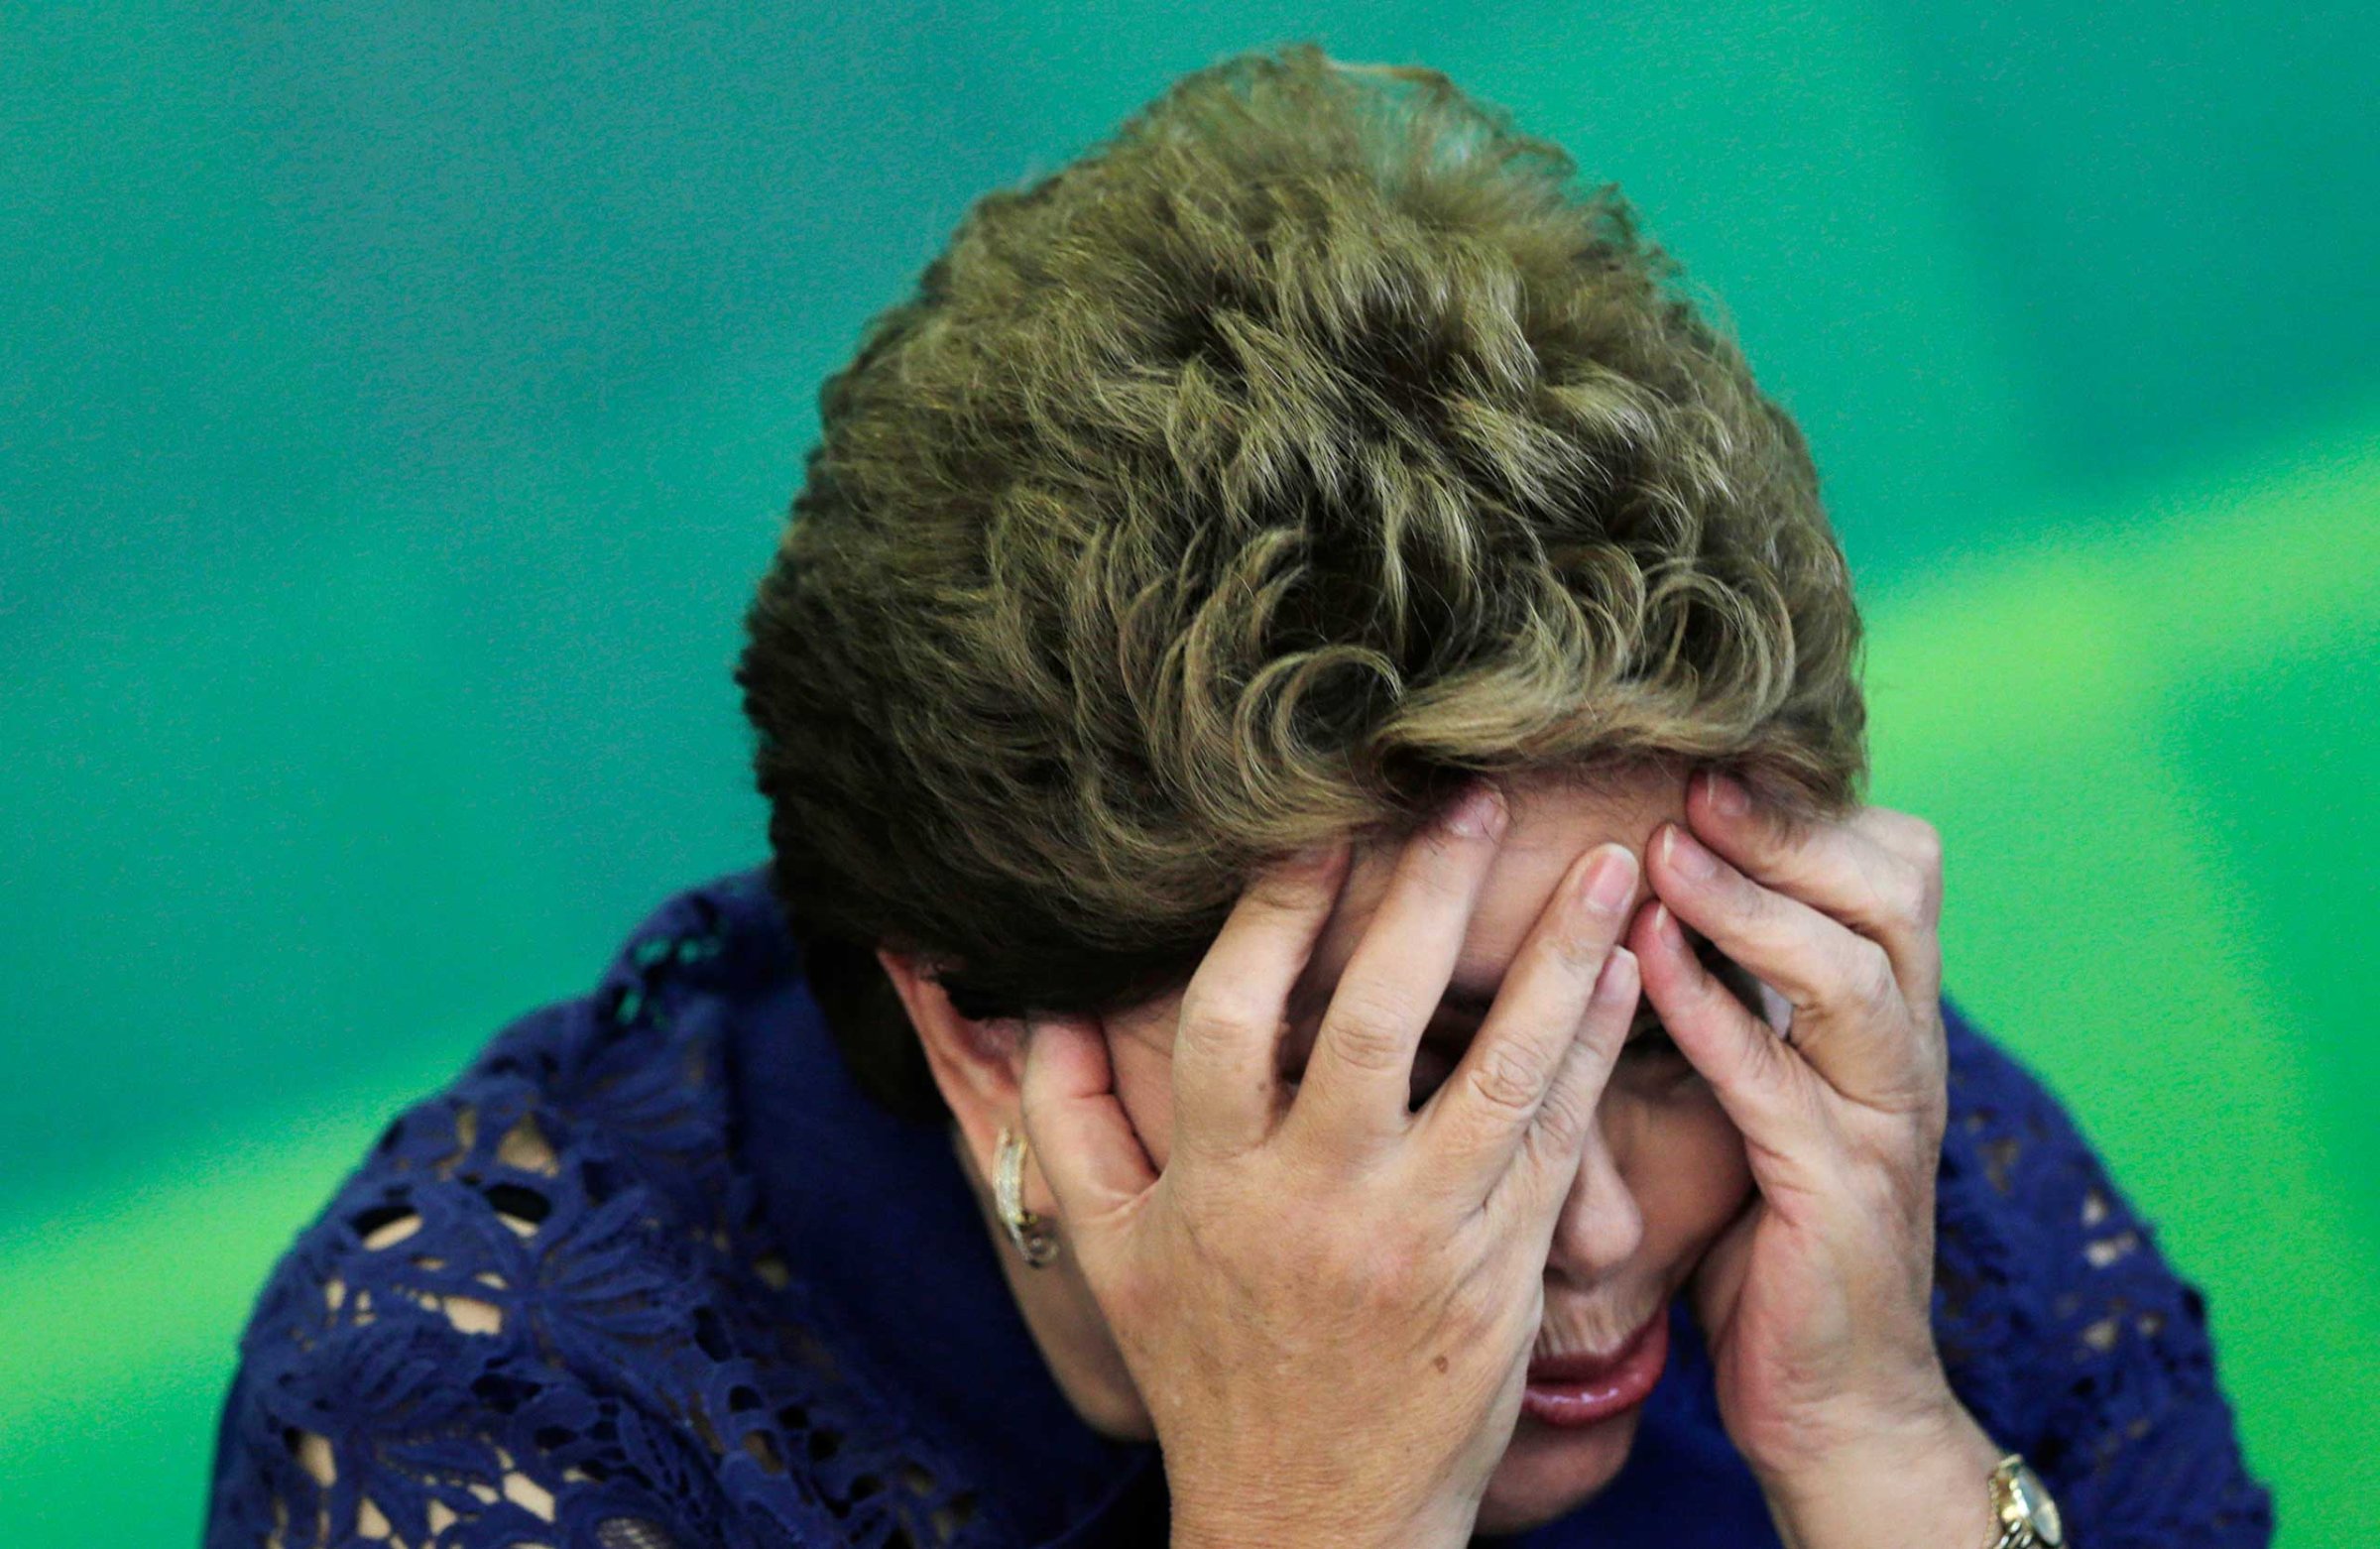 Brazilian President Dilma Rousseff reacts during a breakfast meeting with the media at the Planalto Palace in Brasilia